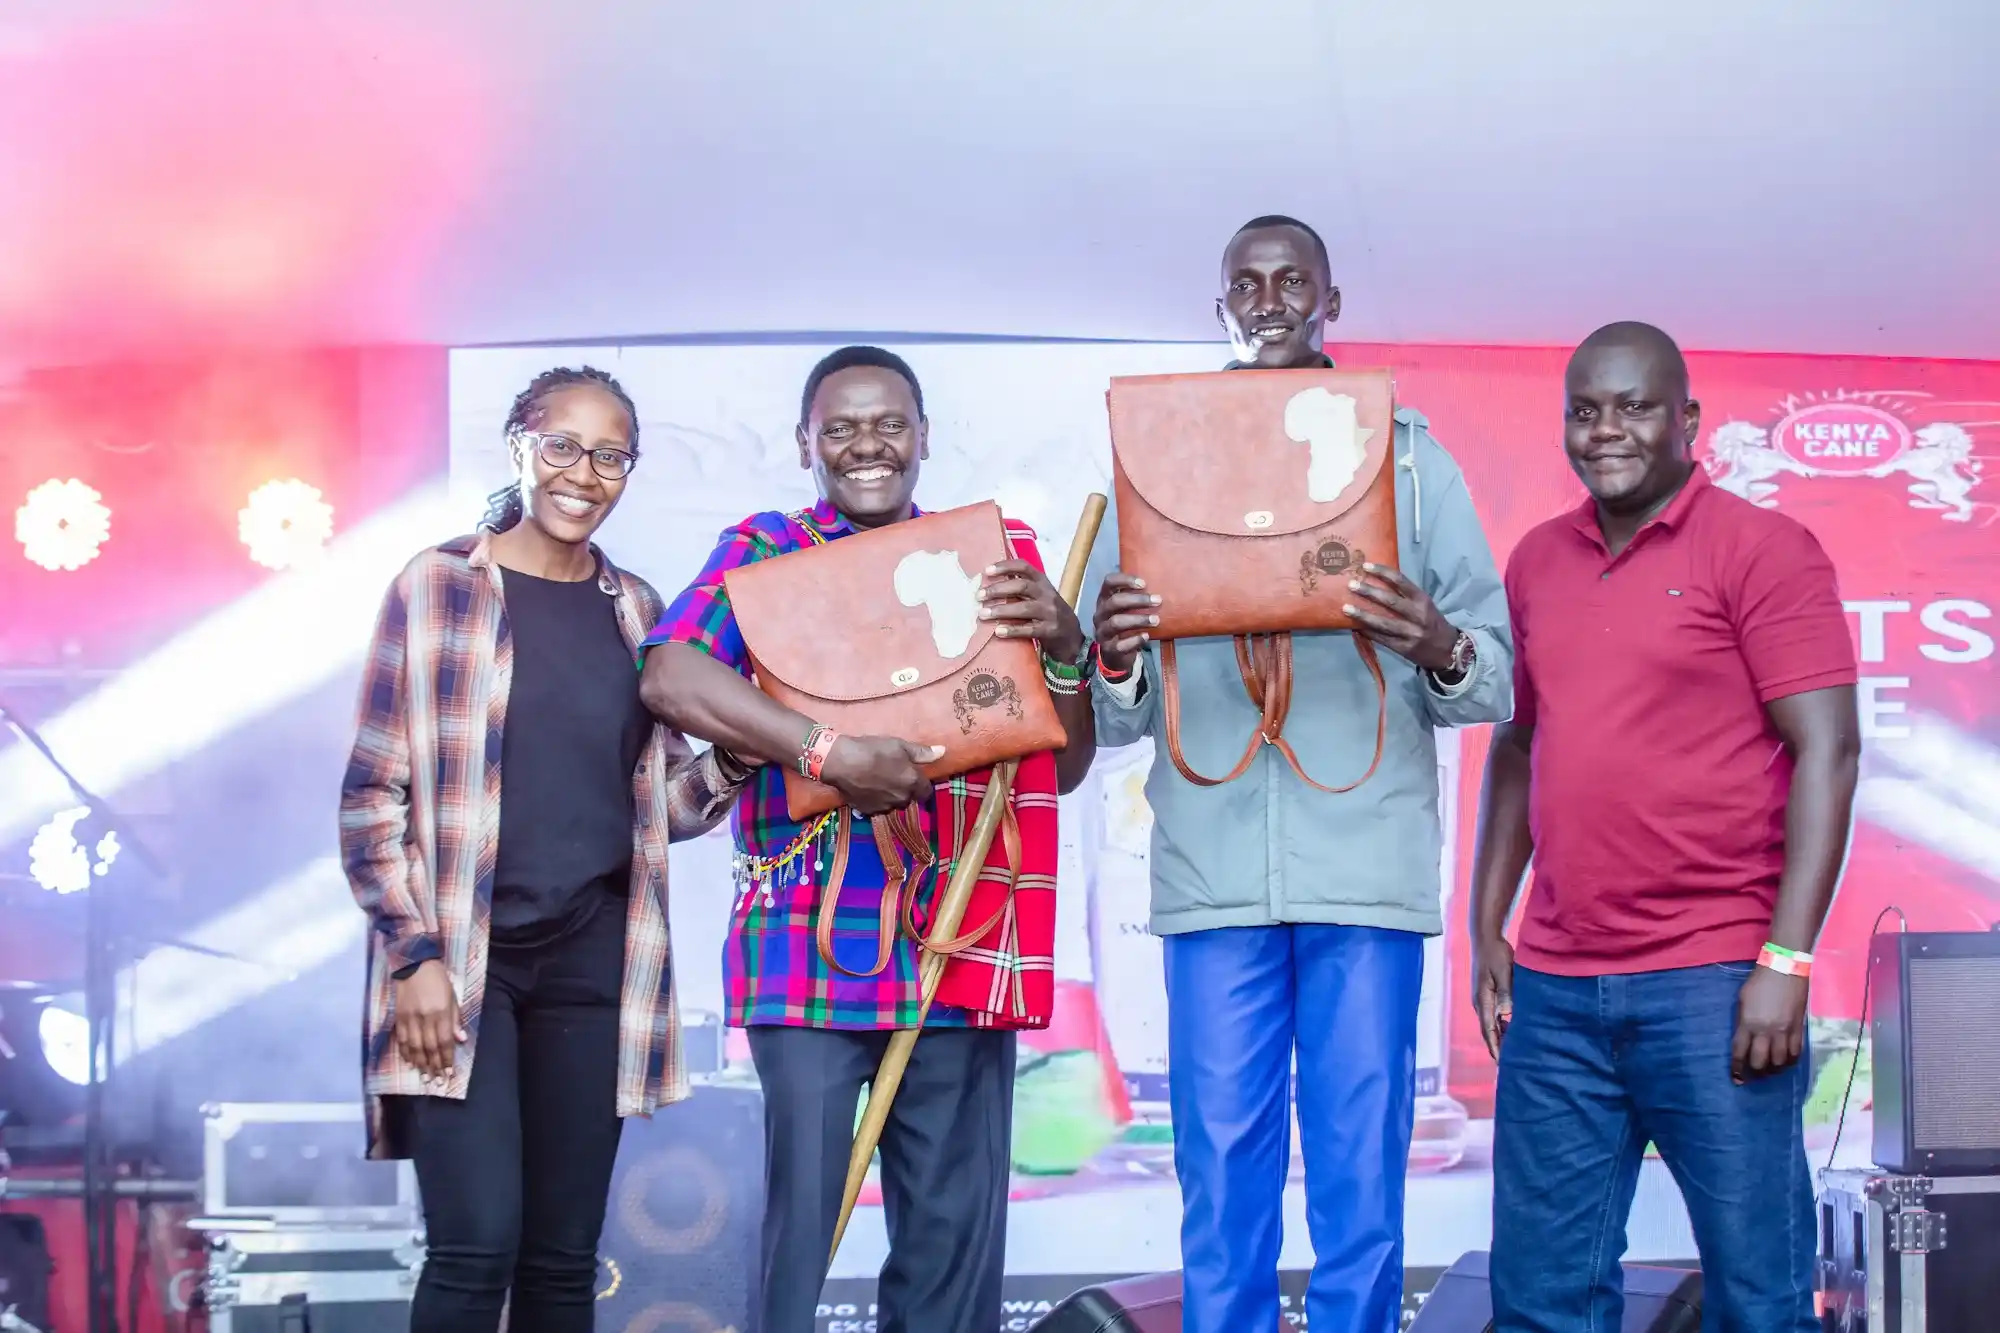 Narok Greats winners Paul Ole Sopia and Joel Koirag pose for a photo with Kenya Cane Brand Manager Davis Changalwa and Shopper Manager Mercy Gitari at the Kenya Cane Greats Fest held at the Boma Resort and Lounge, Narok on Saturday 14 th October.